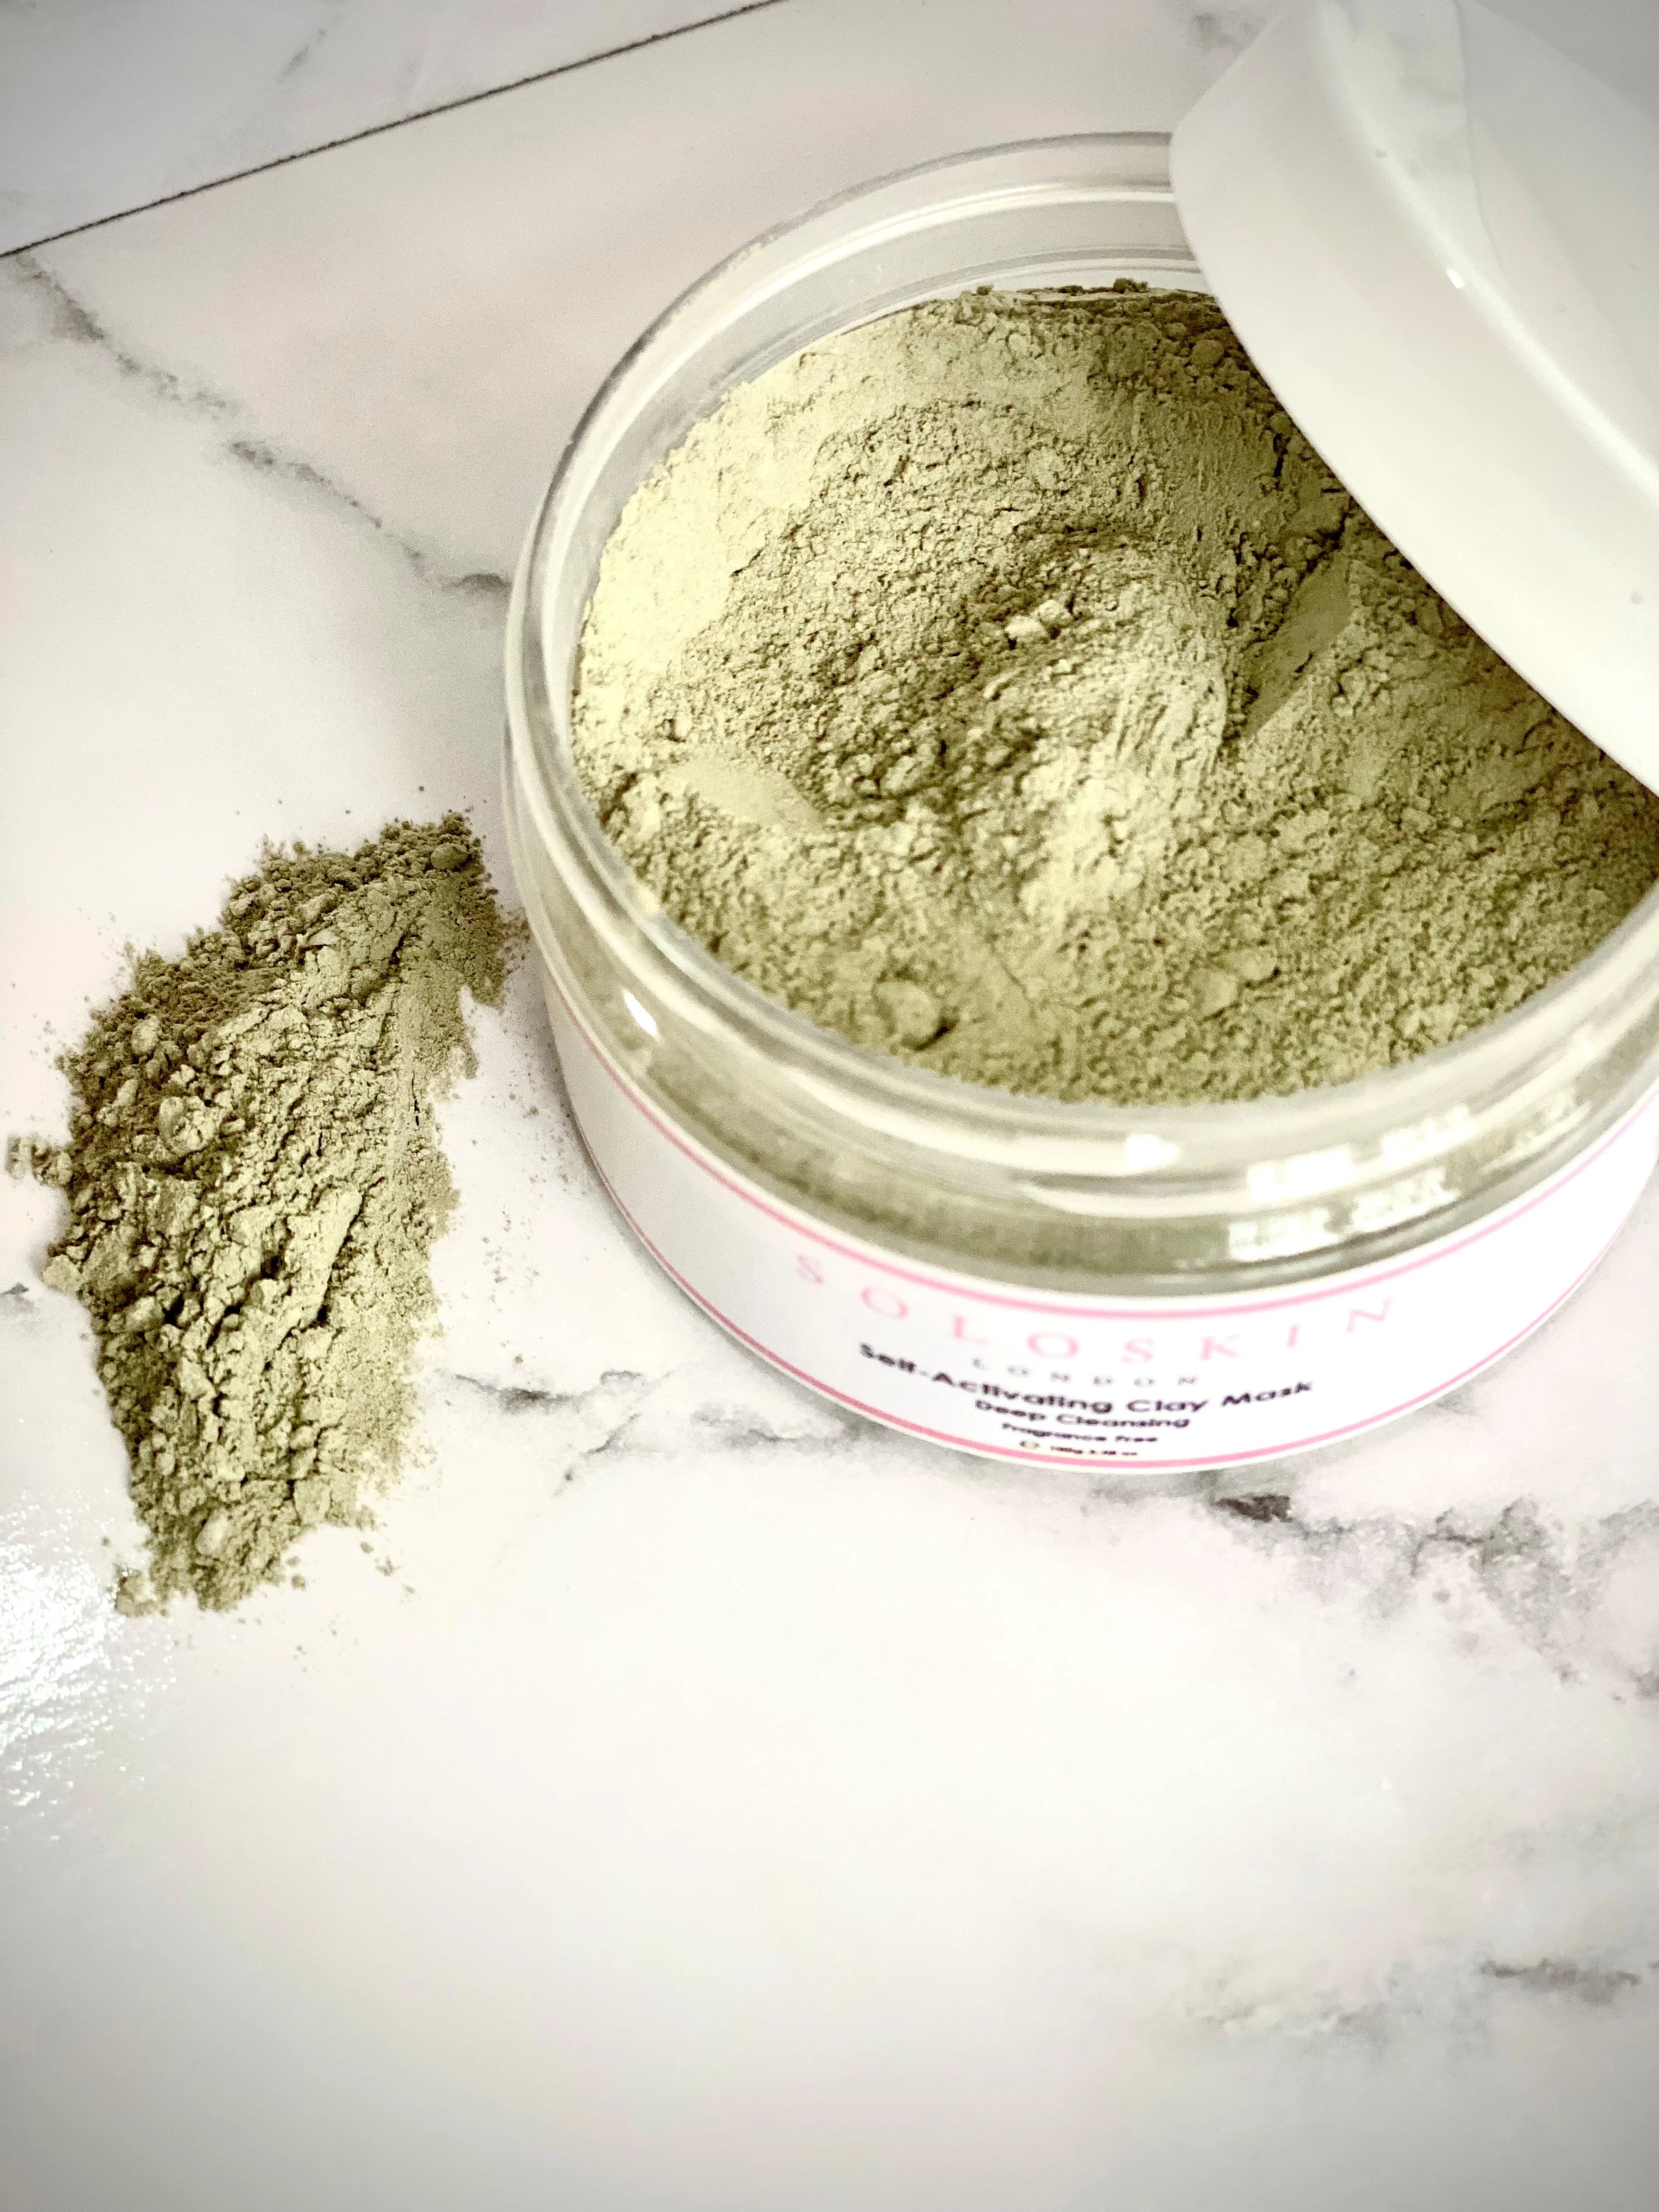 Green clay mask